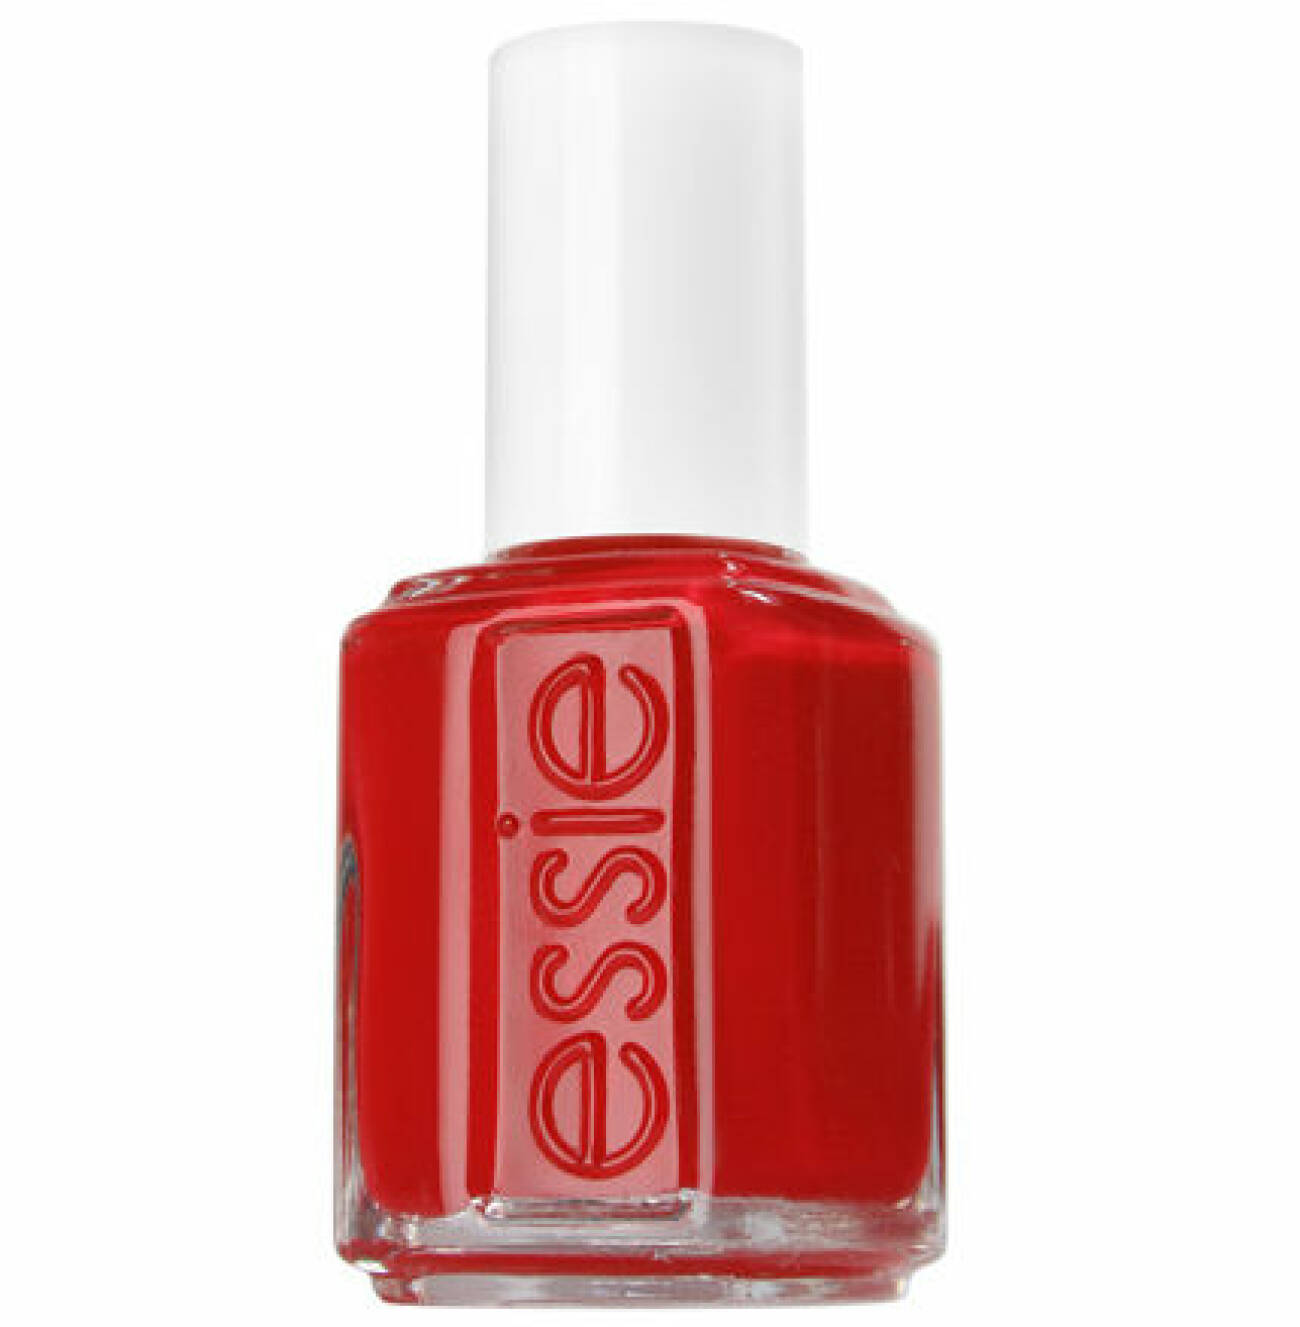 10. Nagellack, Lacquered Up, 129 kr, Essie Nelly.com